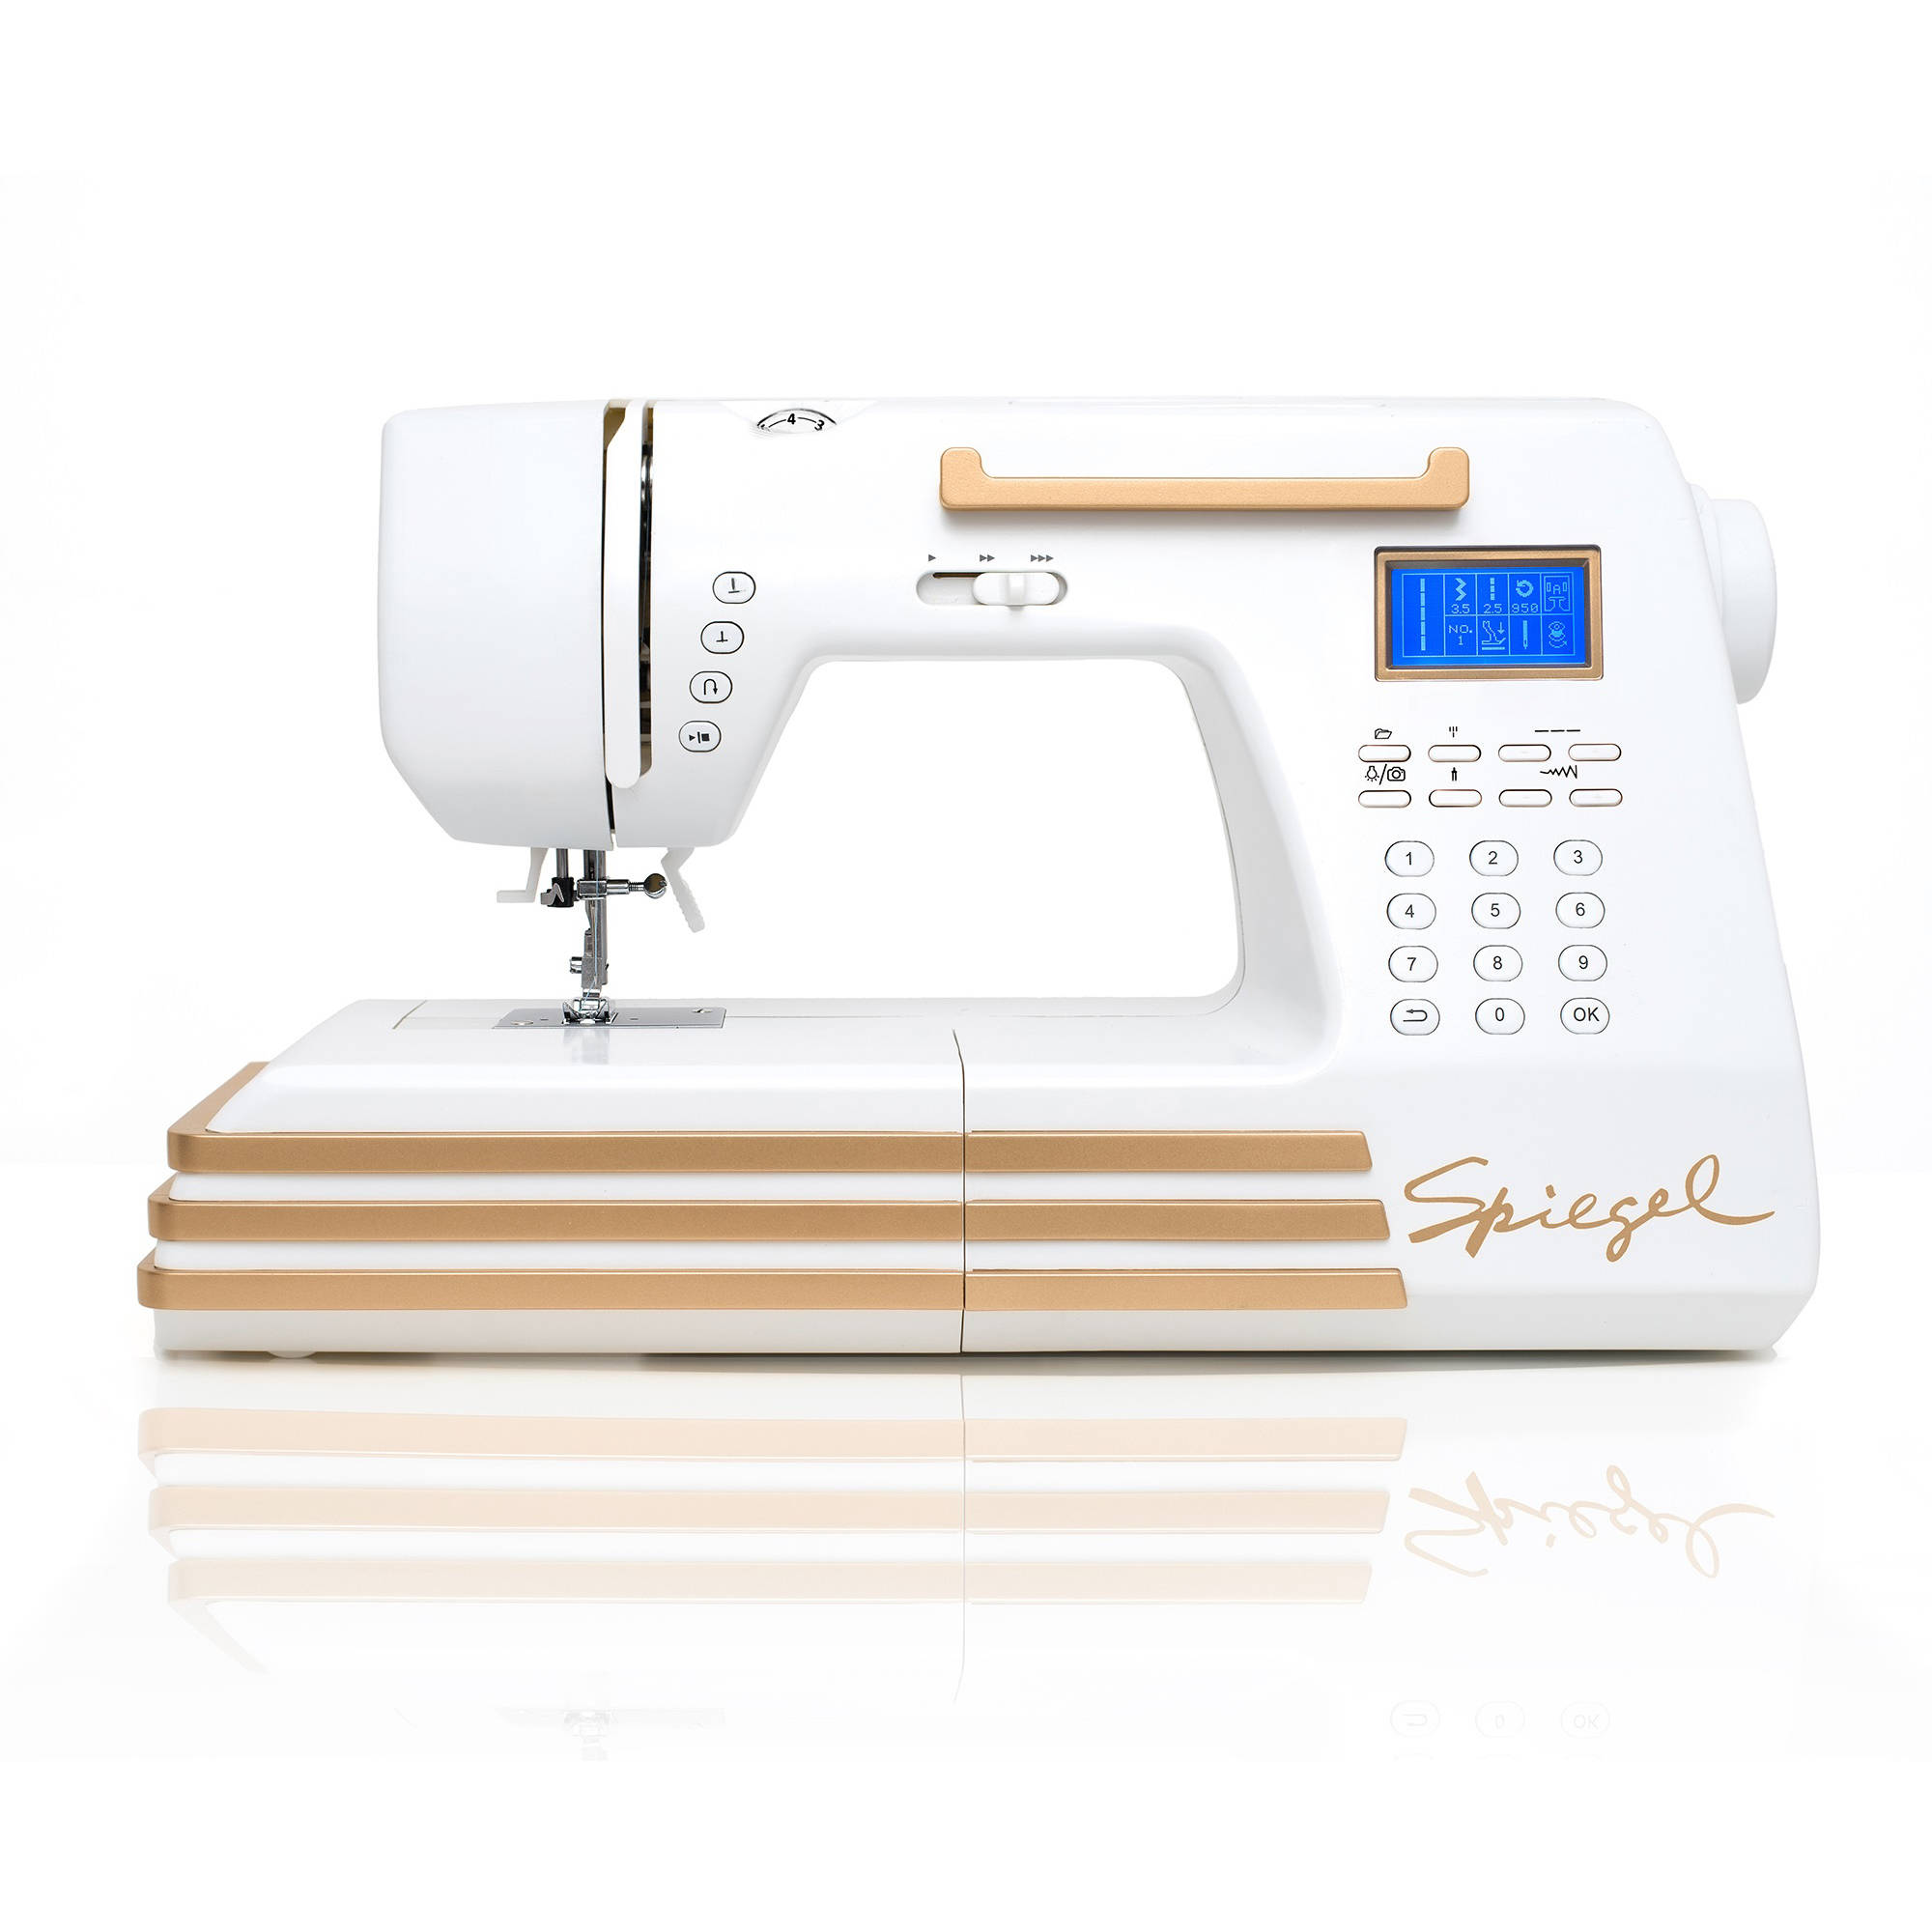 Spiegel 60609 Computerized Sewing Machine - image 1 of 6